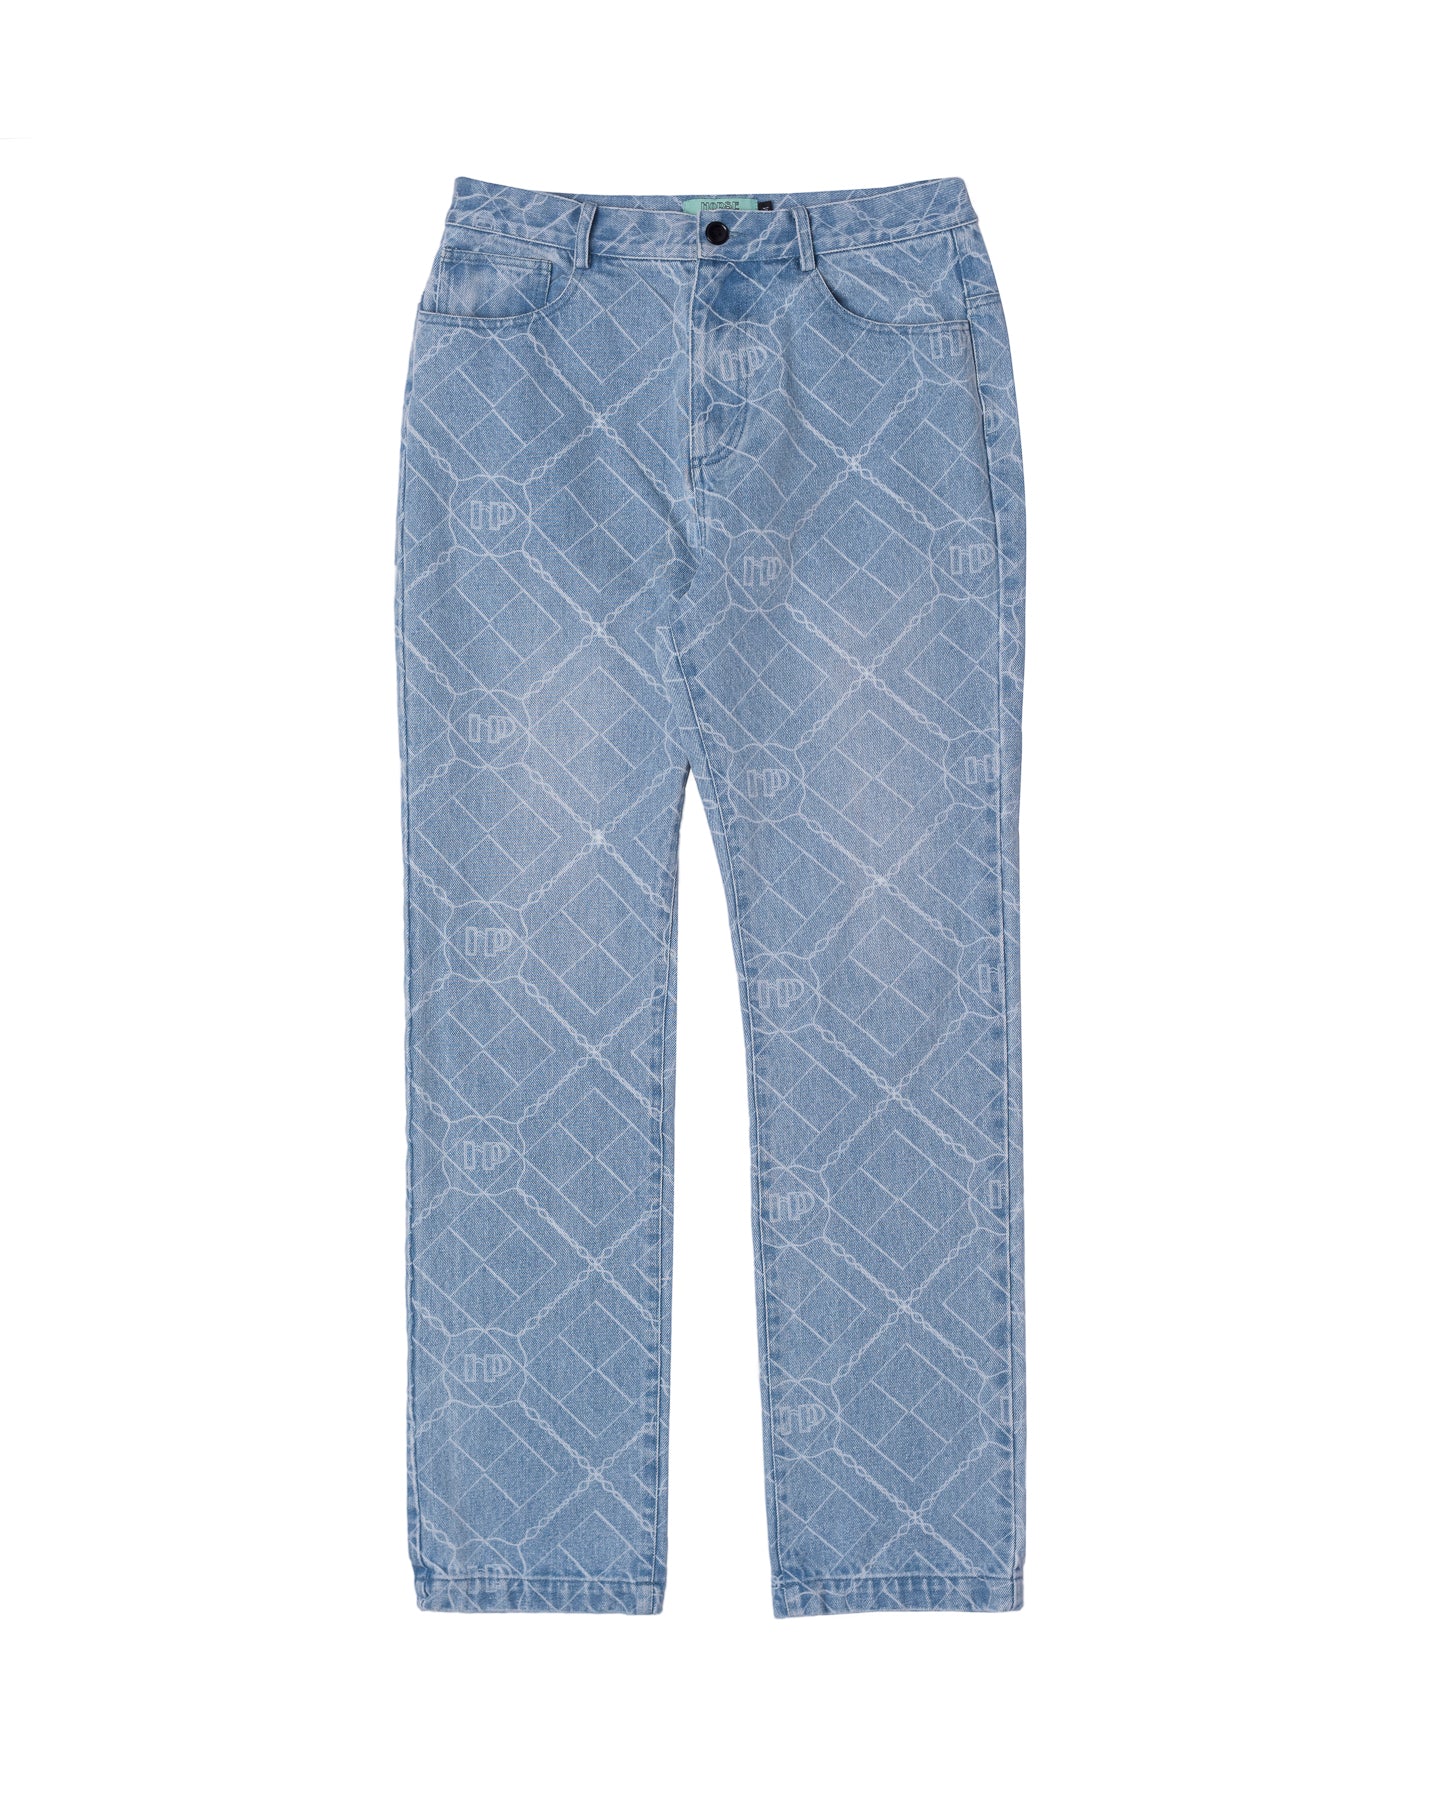 Horse Power - Horse Power Monogram Jeans - INTL Collective - Horse Power Clothing